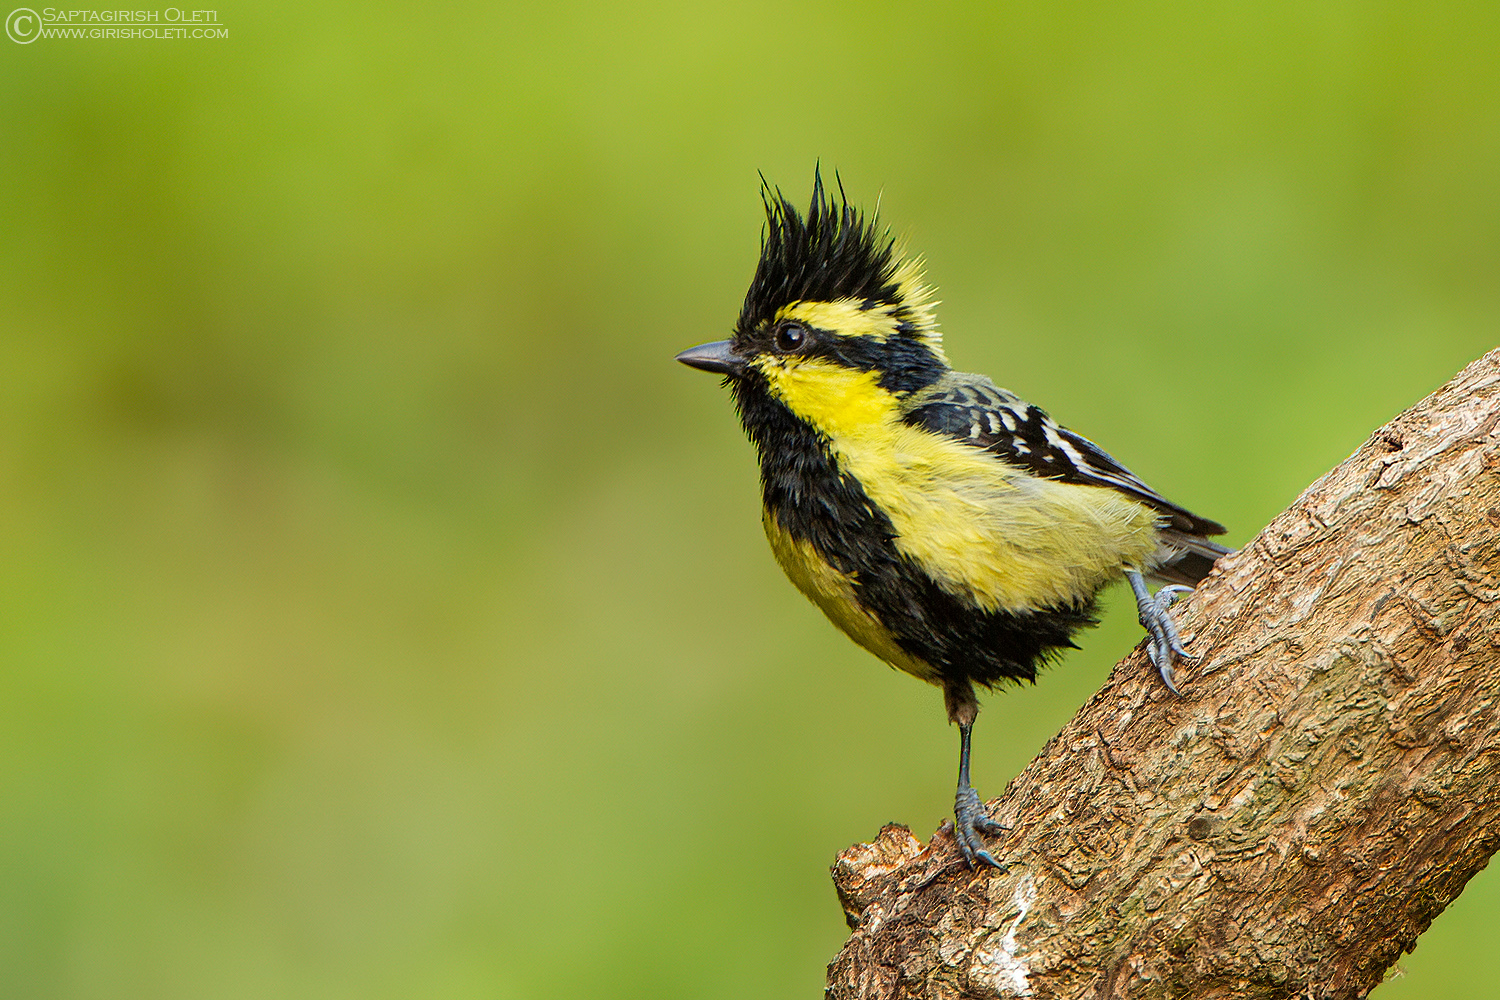 Black-lored Yellow Tit photographed at Sattal, India